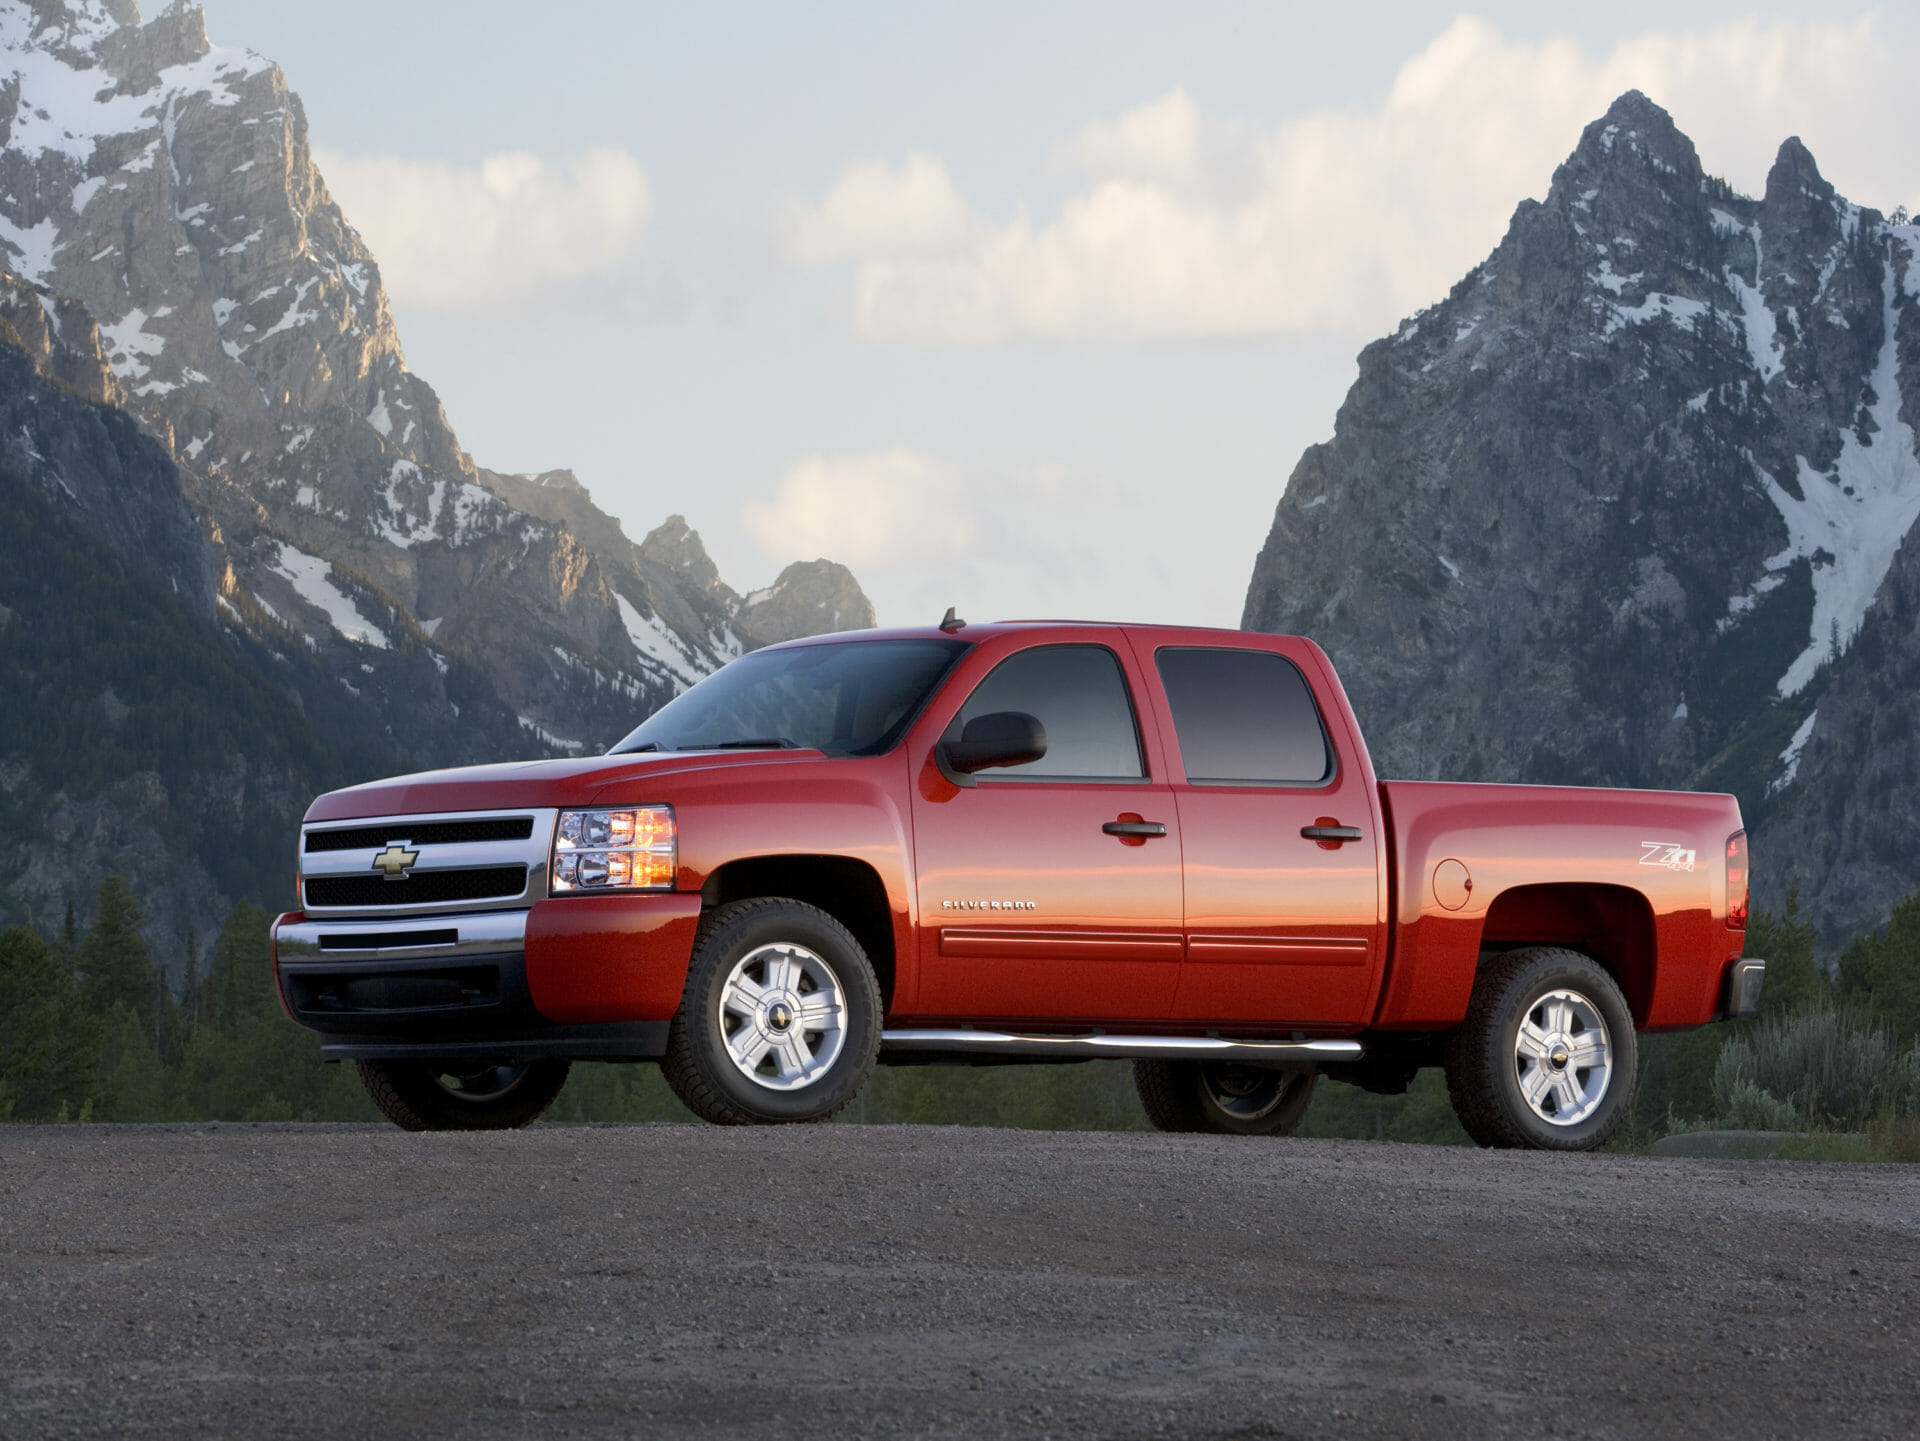 2011 Chevrolet Silverado 1500 Review: A Reliable Full-Size American Truck